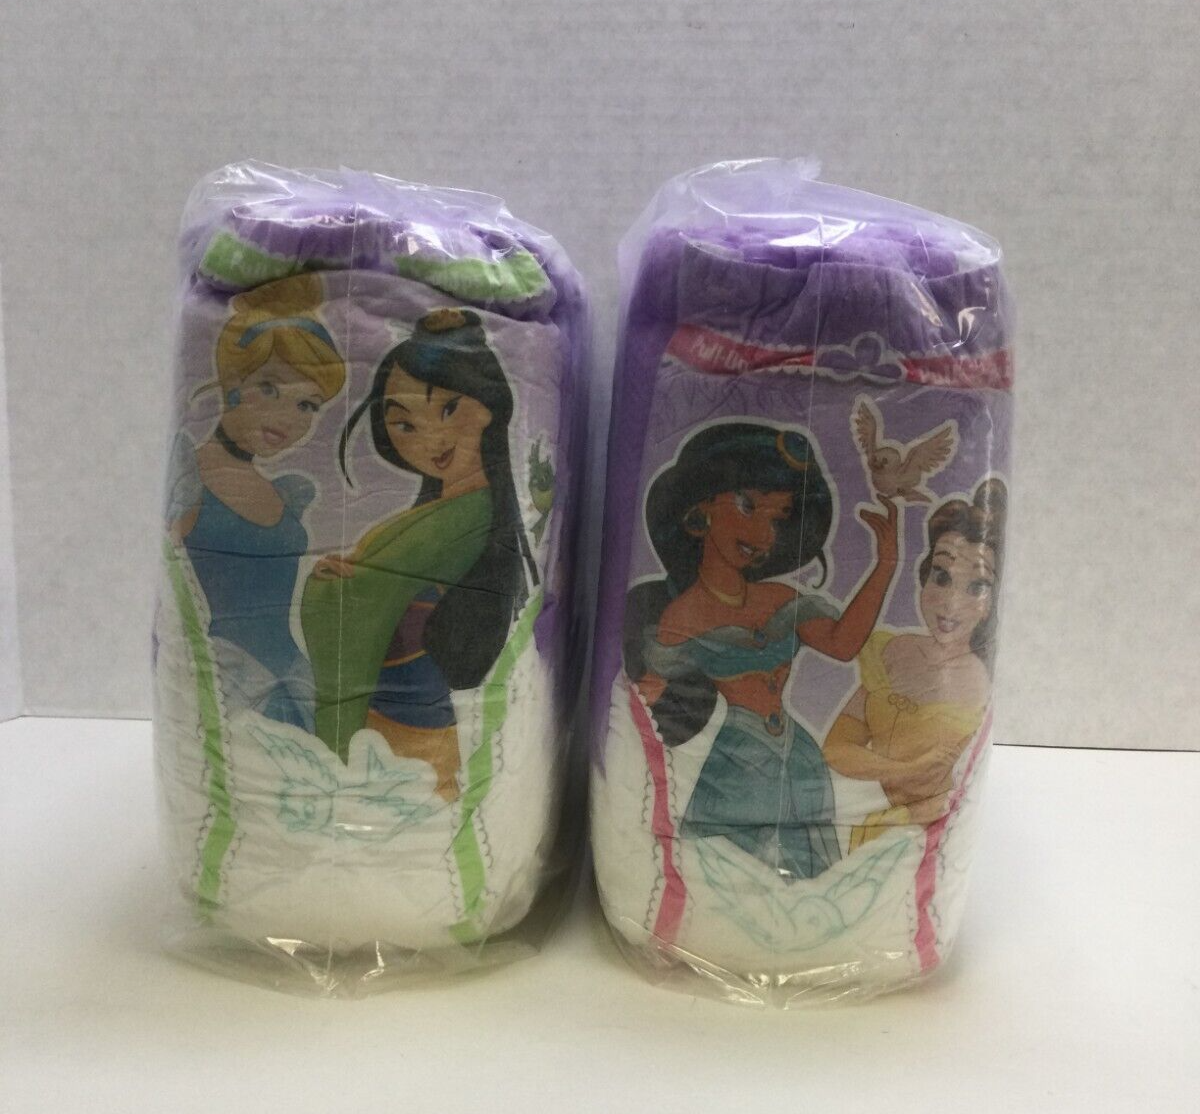 Pull Ups-Disney Princess Theme-Size 3T-4T-2 Packs-57 Count Free Shipping Pull-Ups does not apply